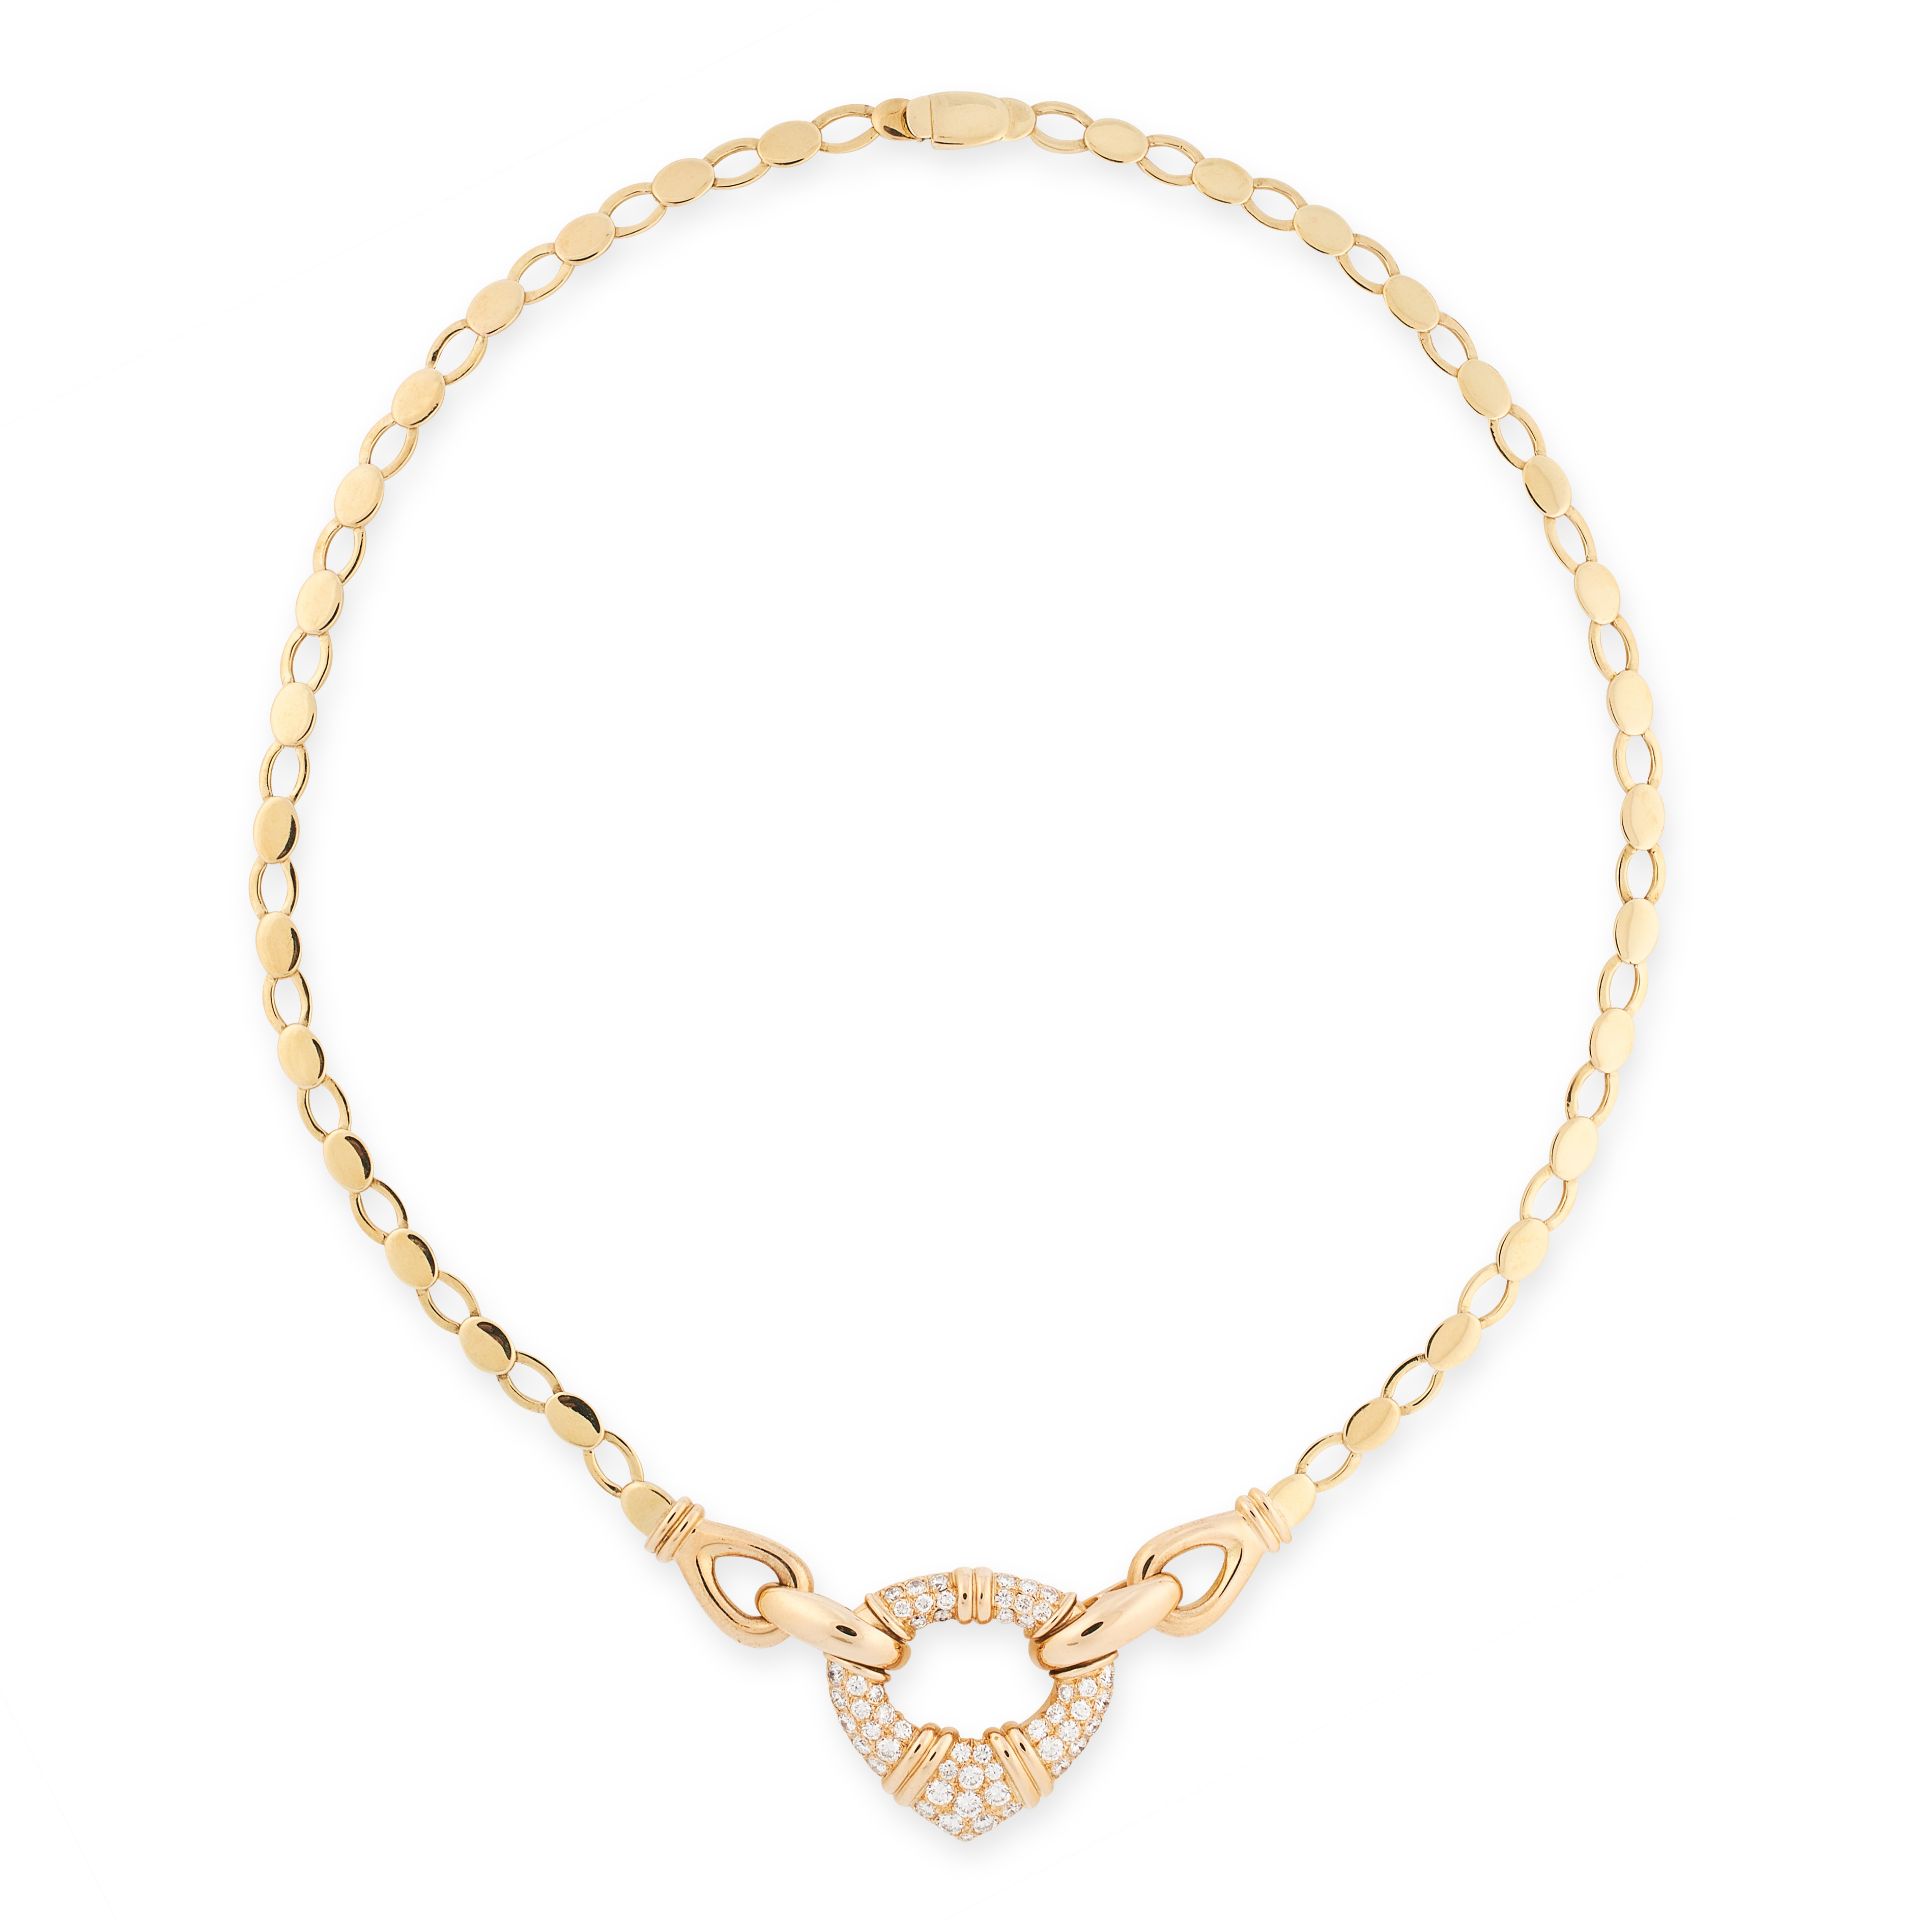 A VINTAGE DIAMOND NECKLACE, GARRARD in 18ct yellow gold, the fancy link chain suspending a